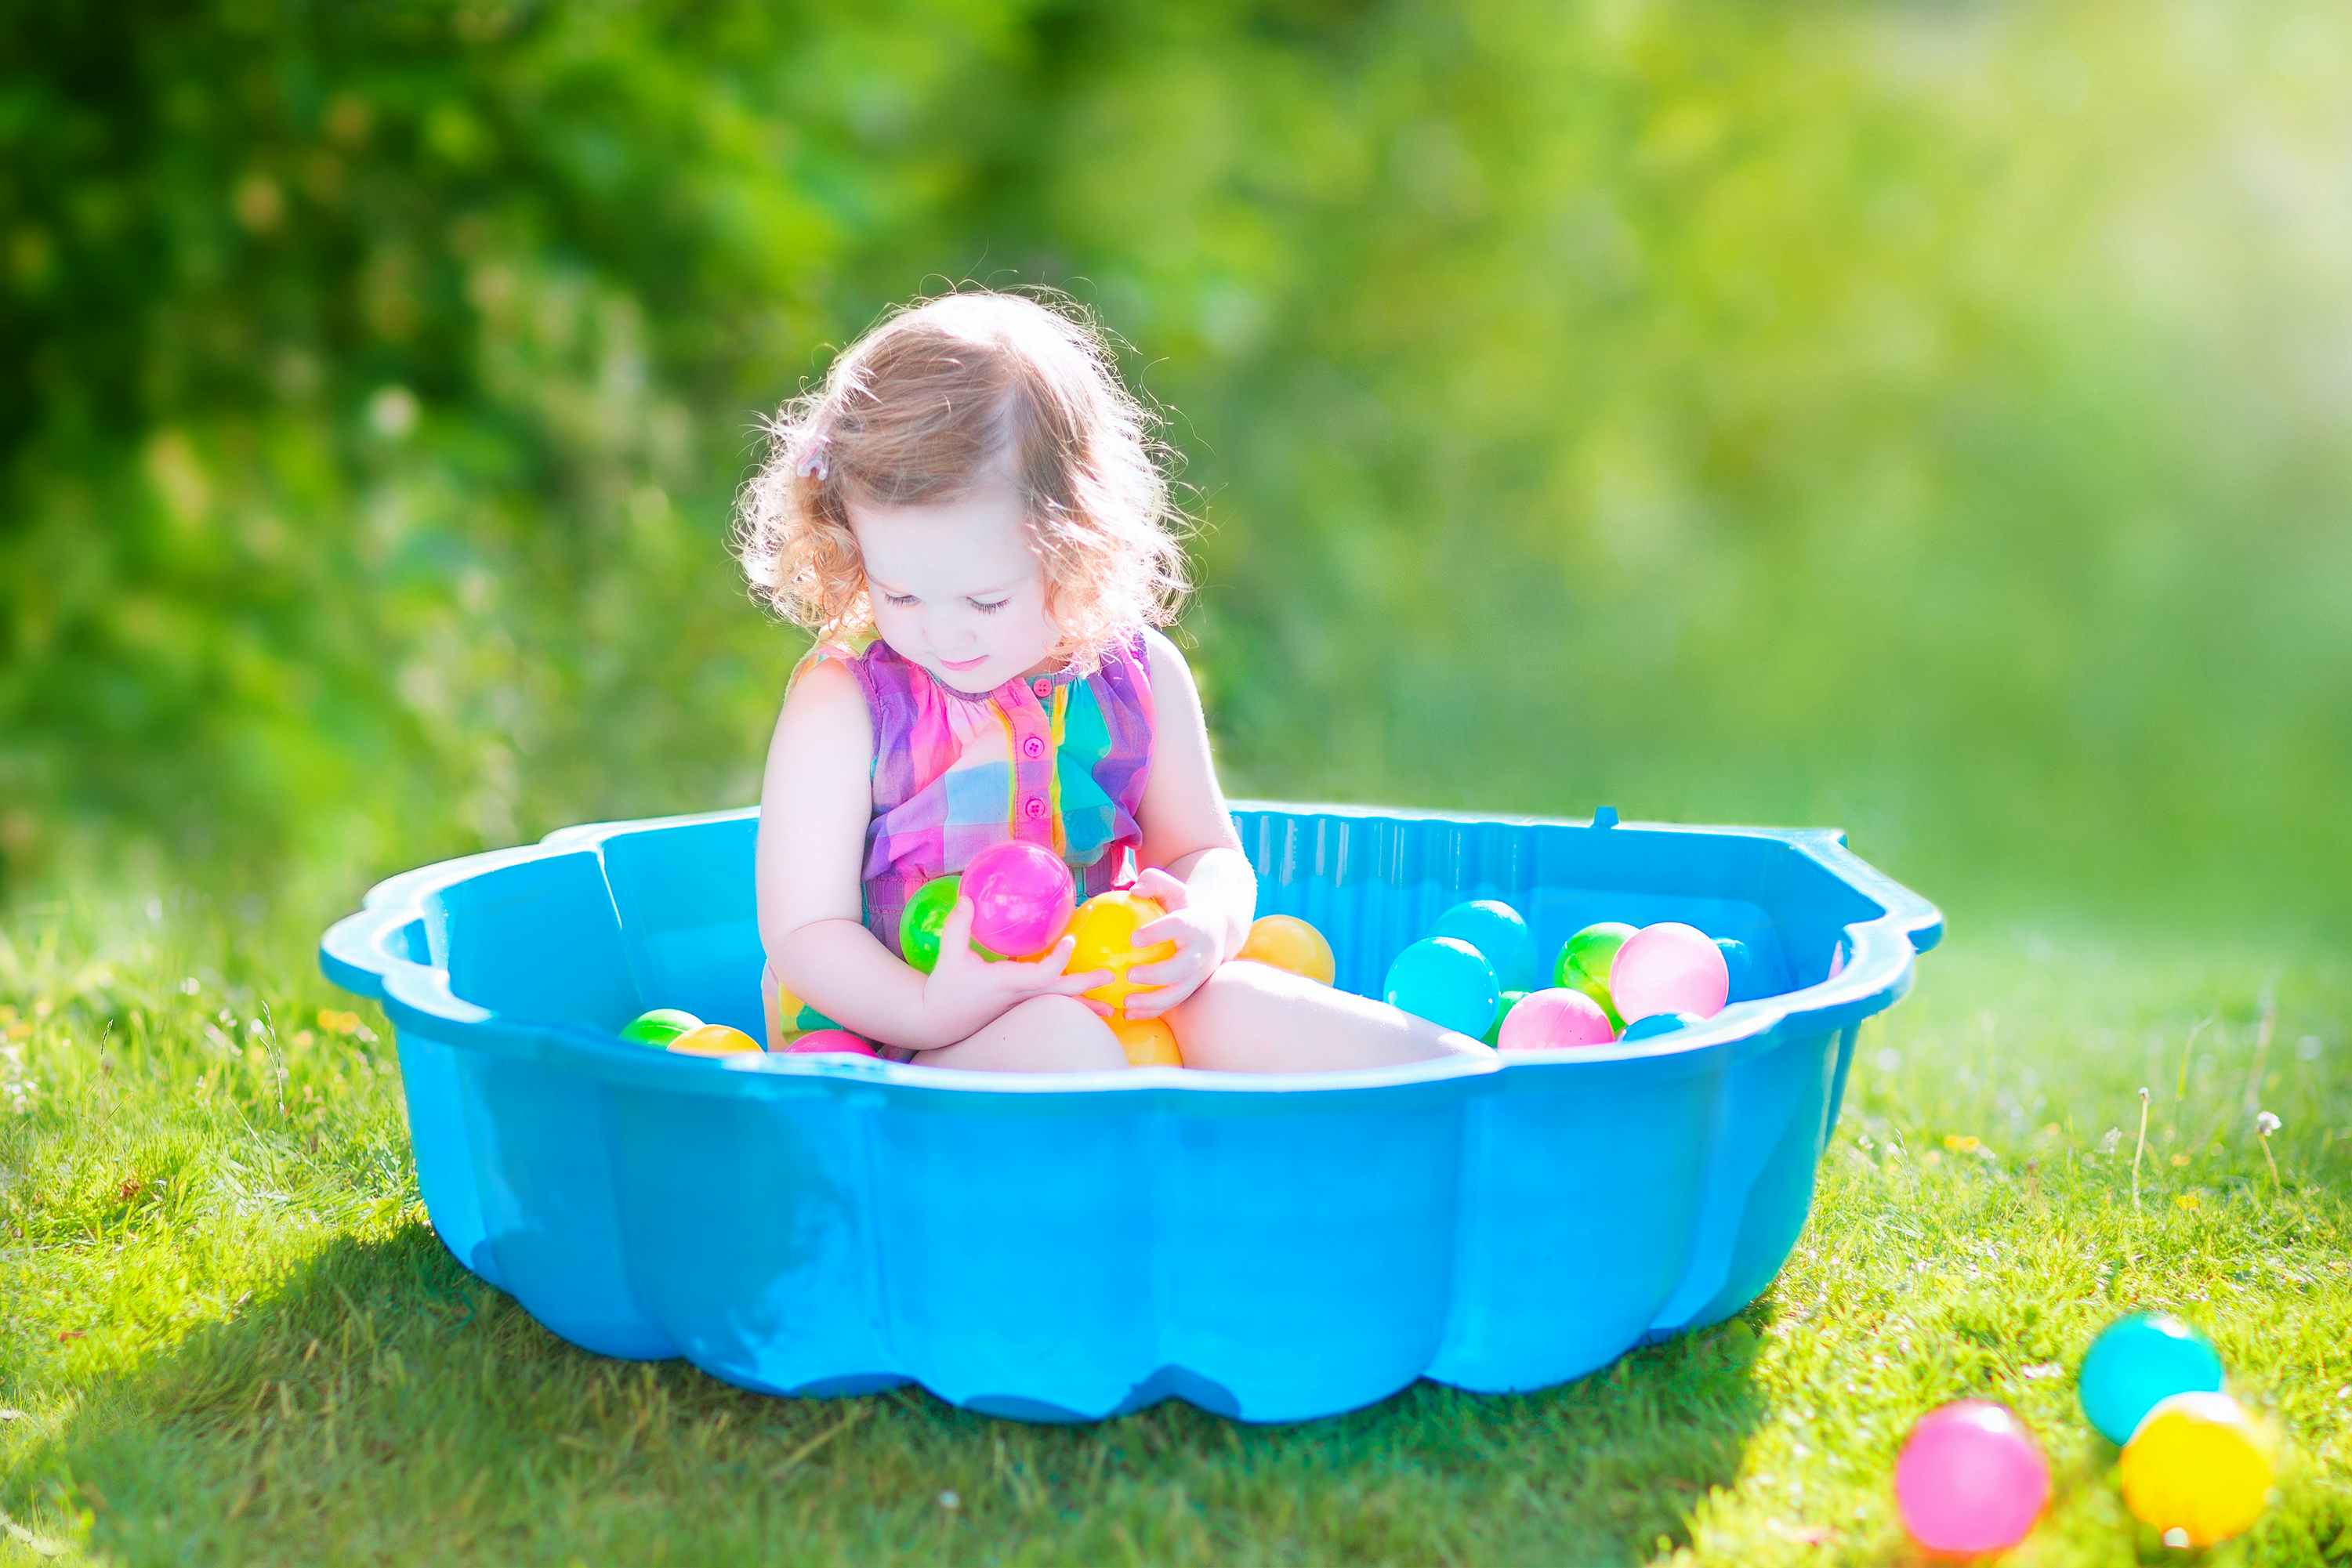 A little girl playing outside in a kiddie pool filled with ball pit balls